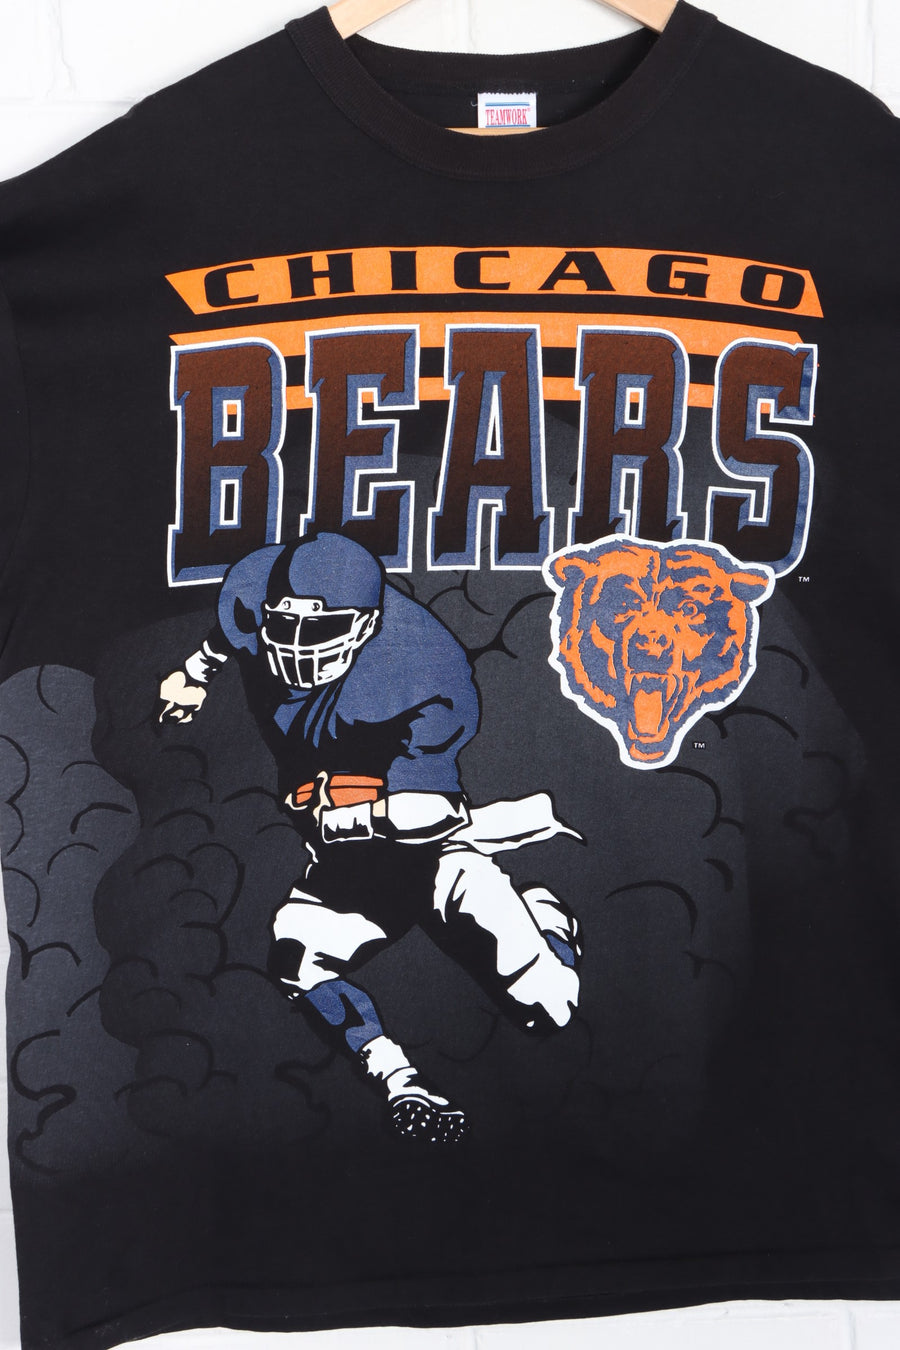 NFL Chicago Bears Front Back Single Stitch T-Shirt USA Made (XL)